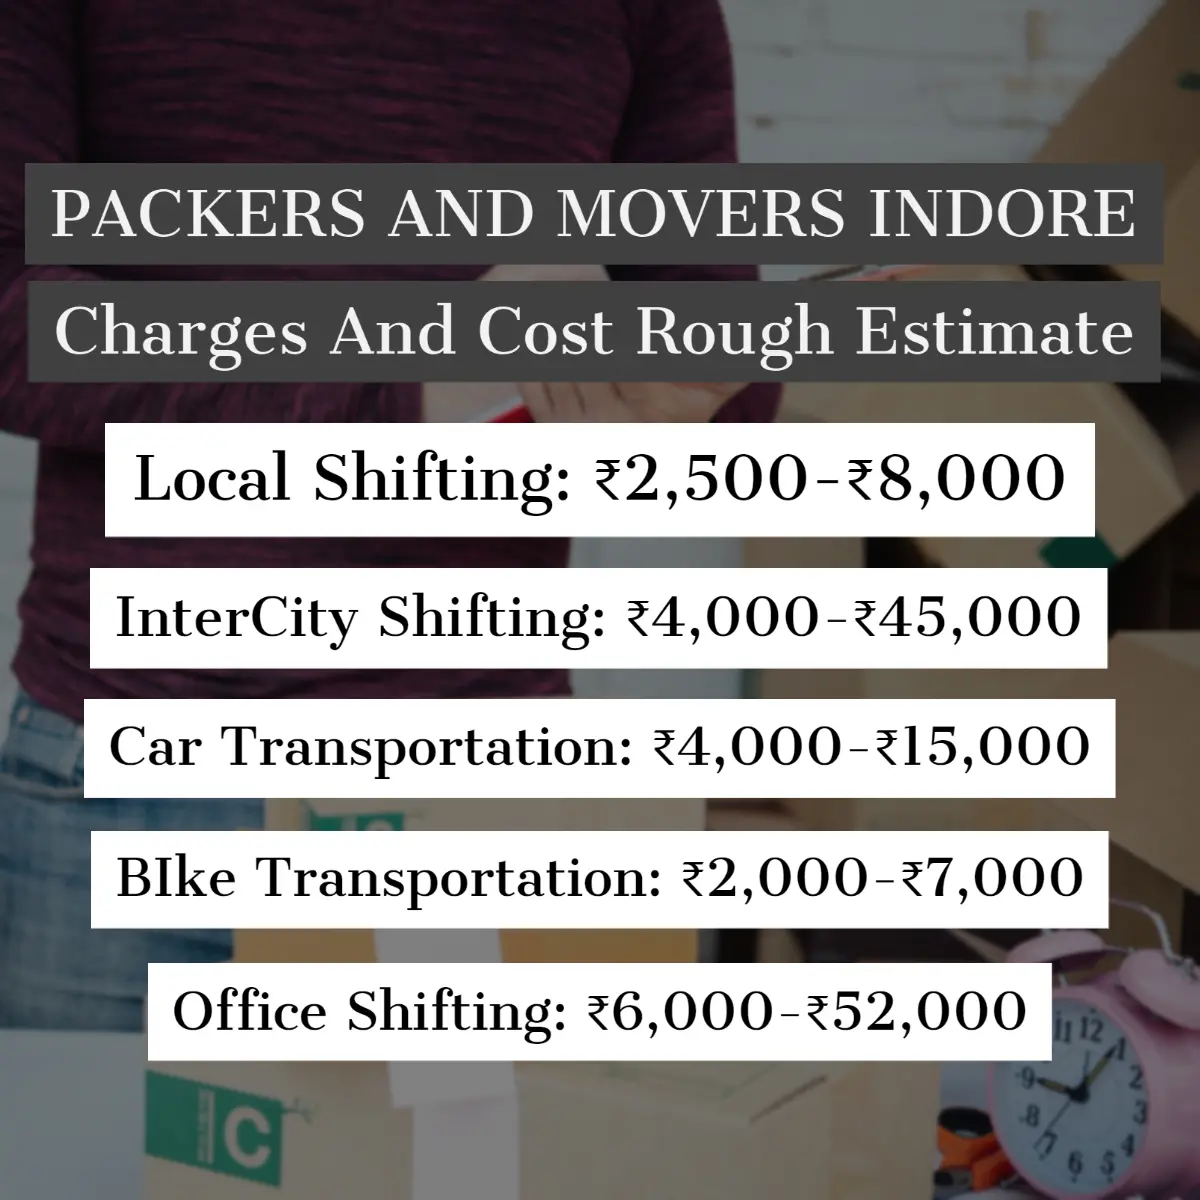 Packers and Movers Indore Charges